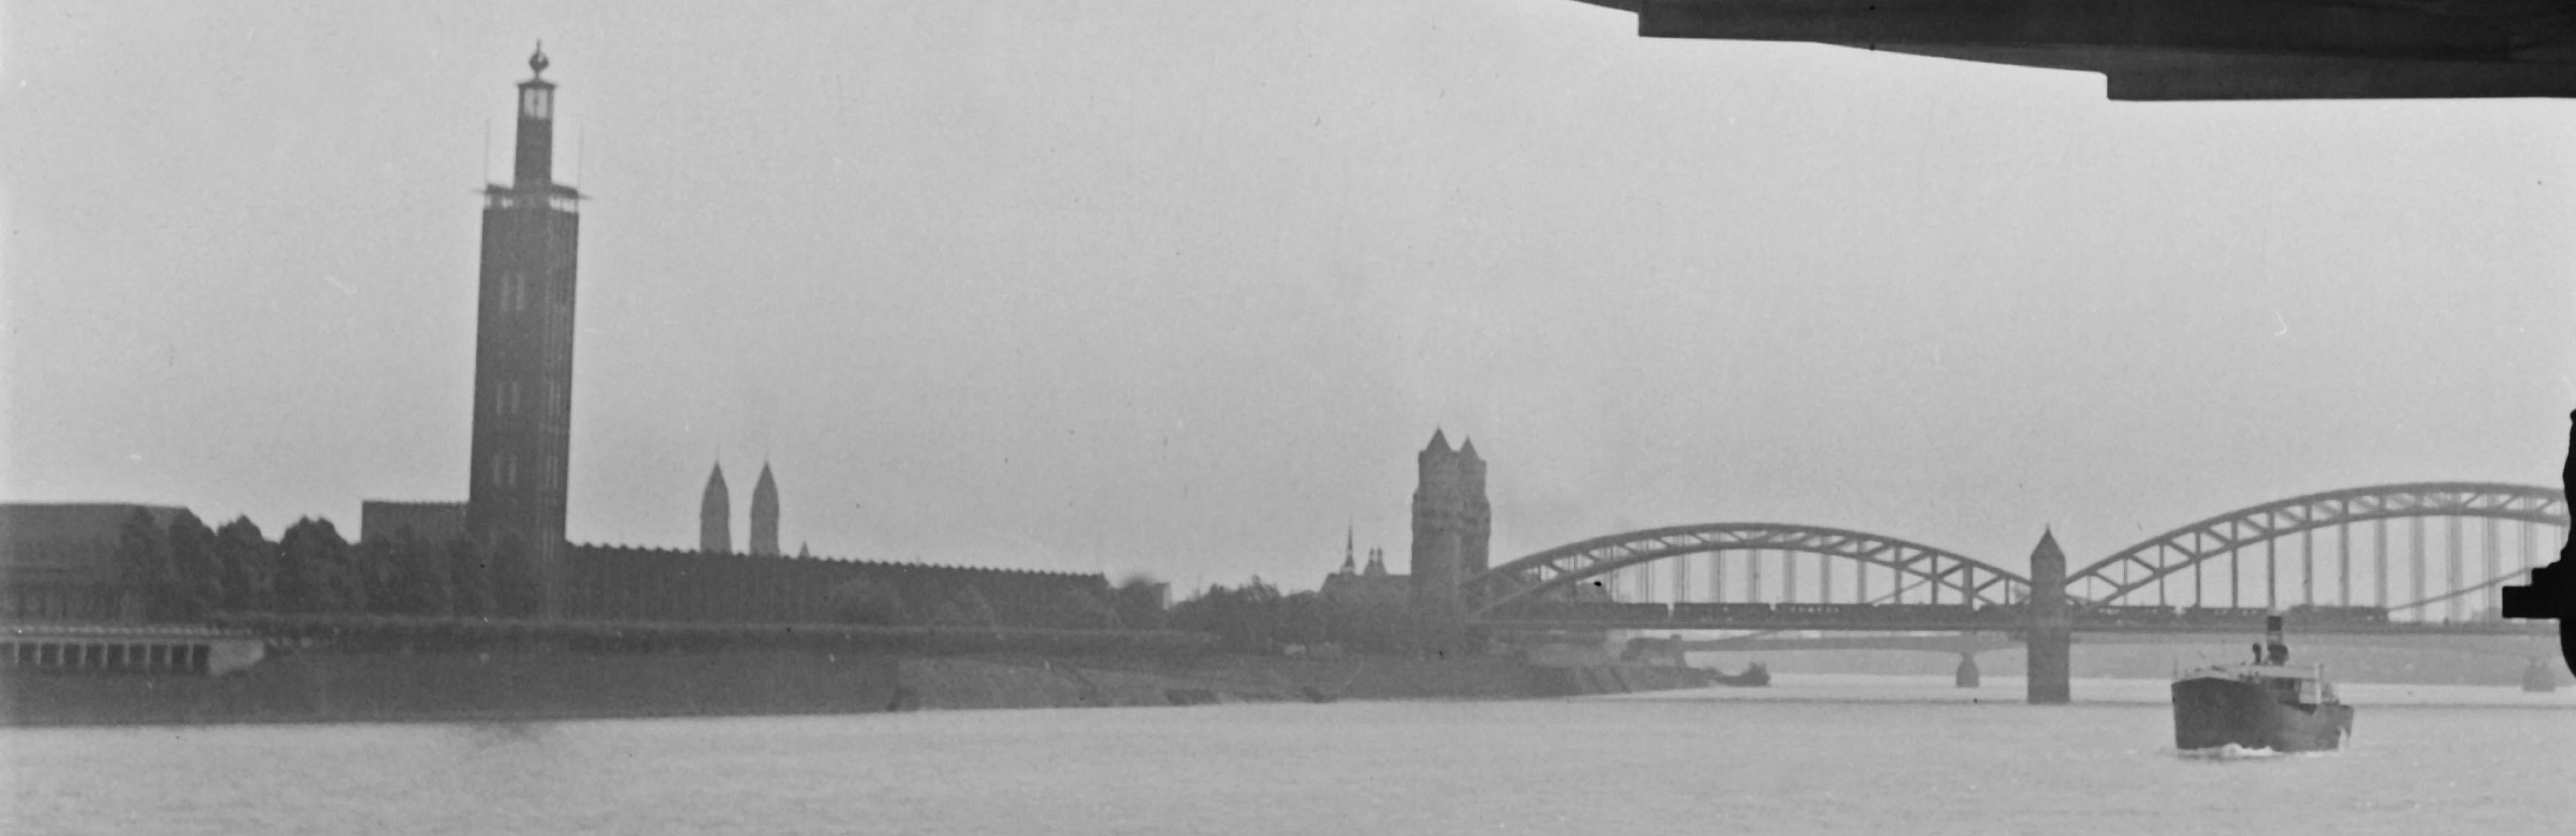 Cologne, Germany 1935, Printed Later - Modern Photograph by Karl Heinrich Lämmel